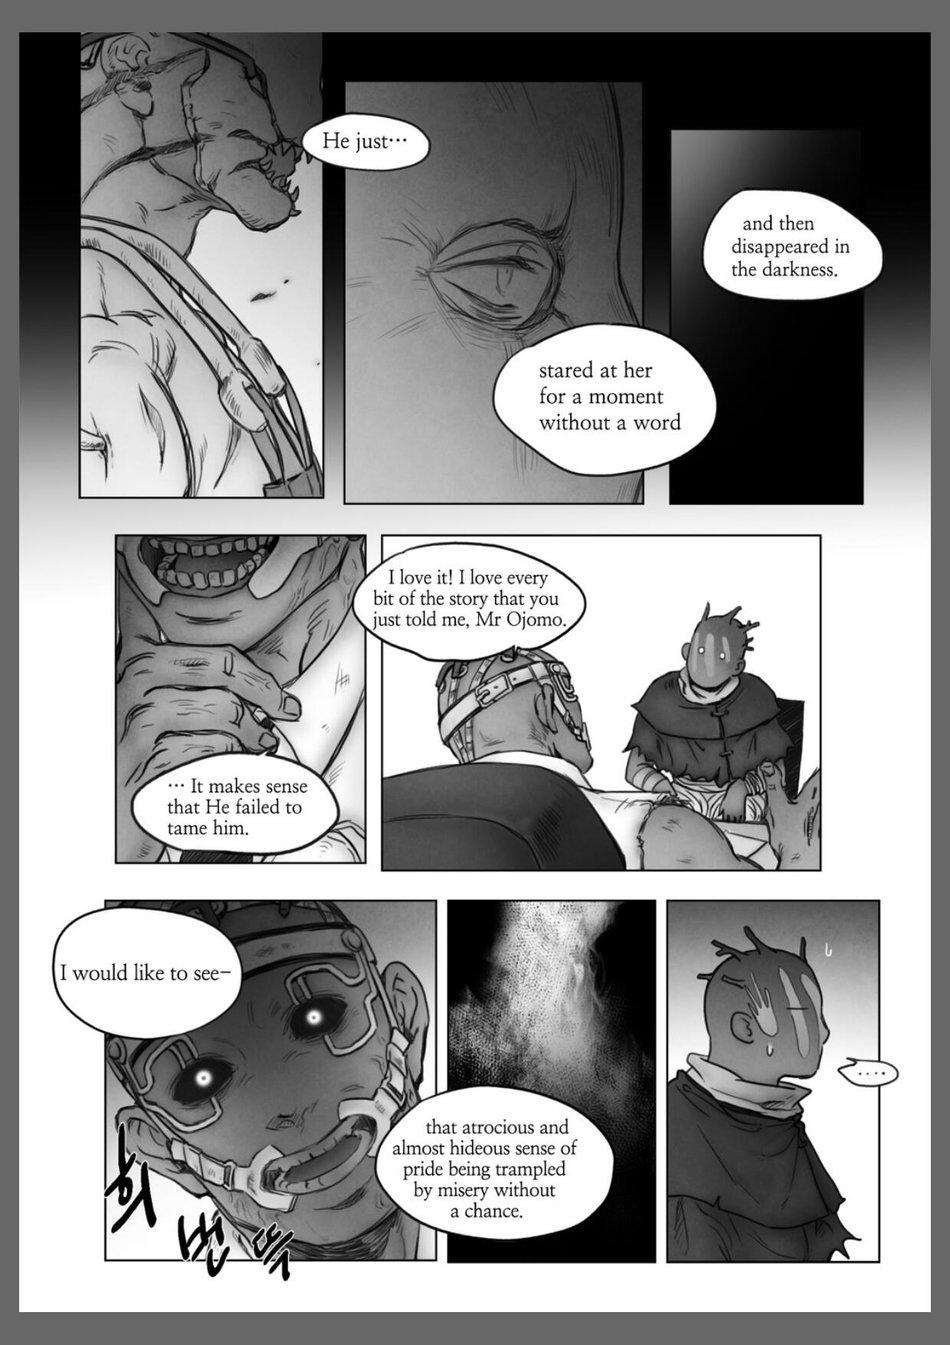 Nasty Bring Me to Death - Dead by daylight Amature Allure - Page 8